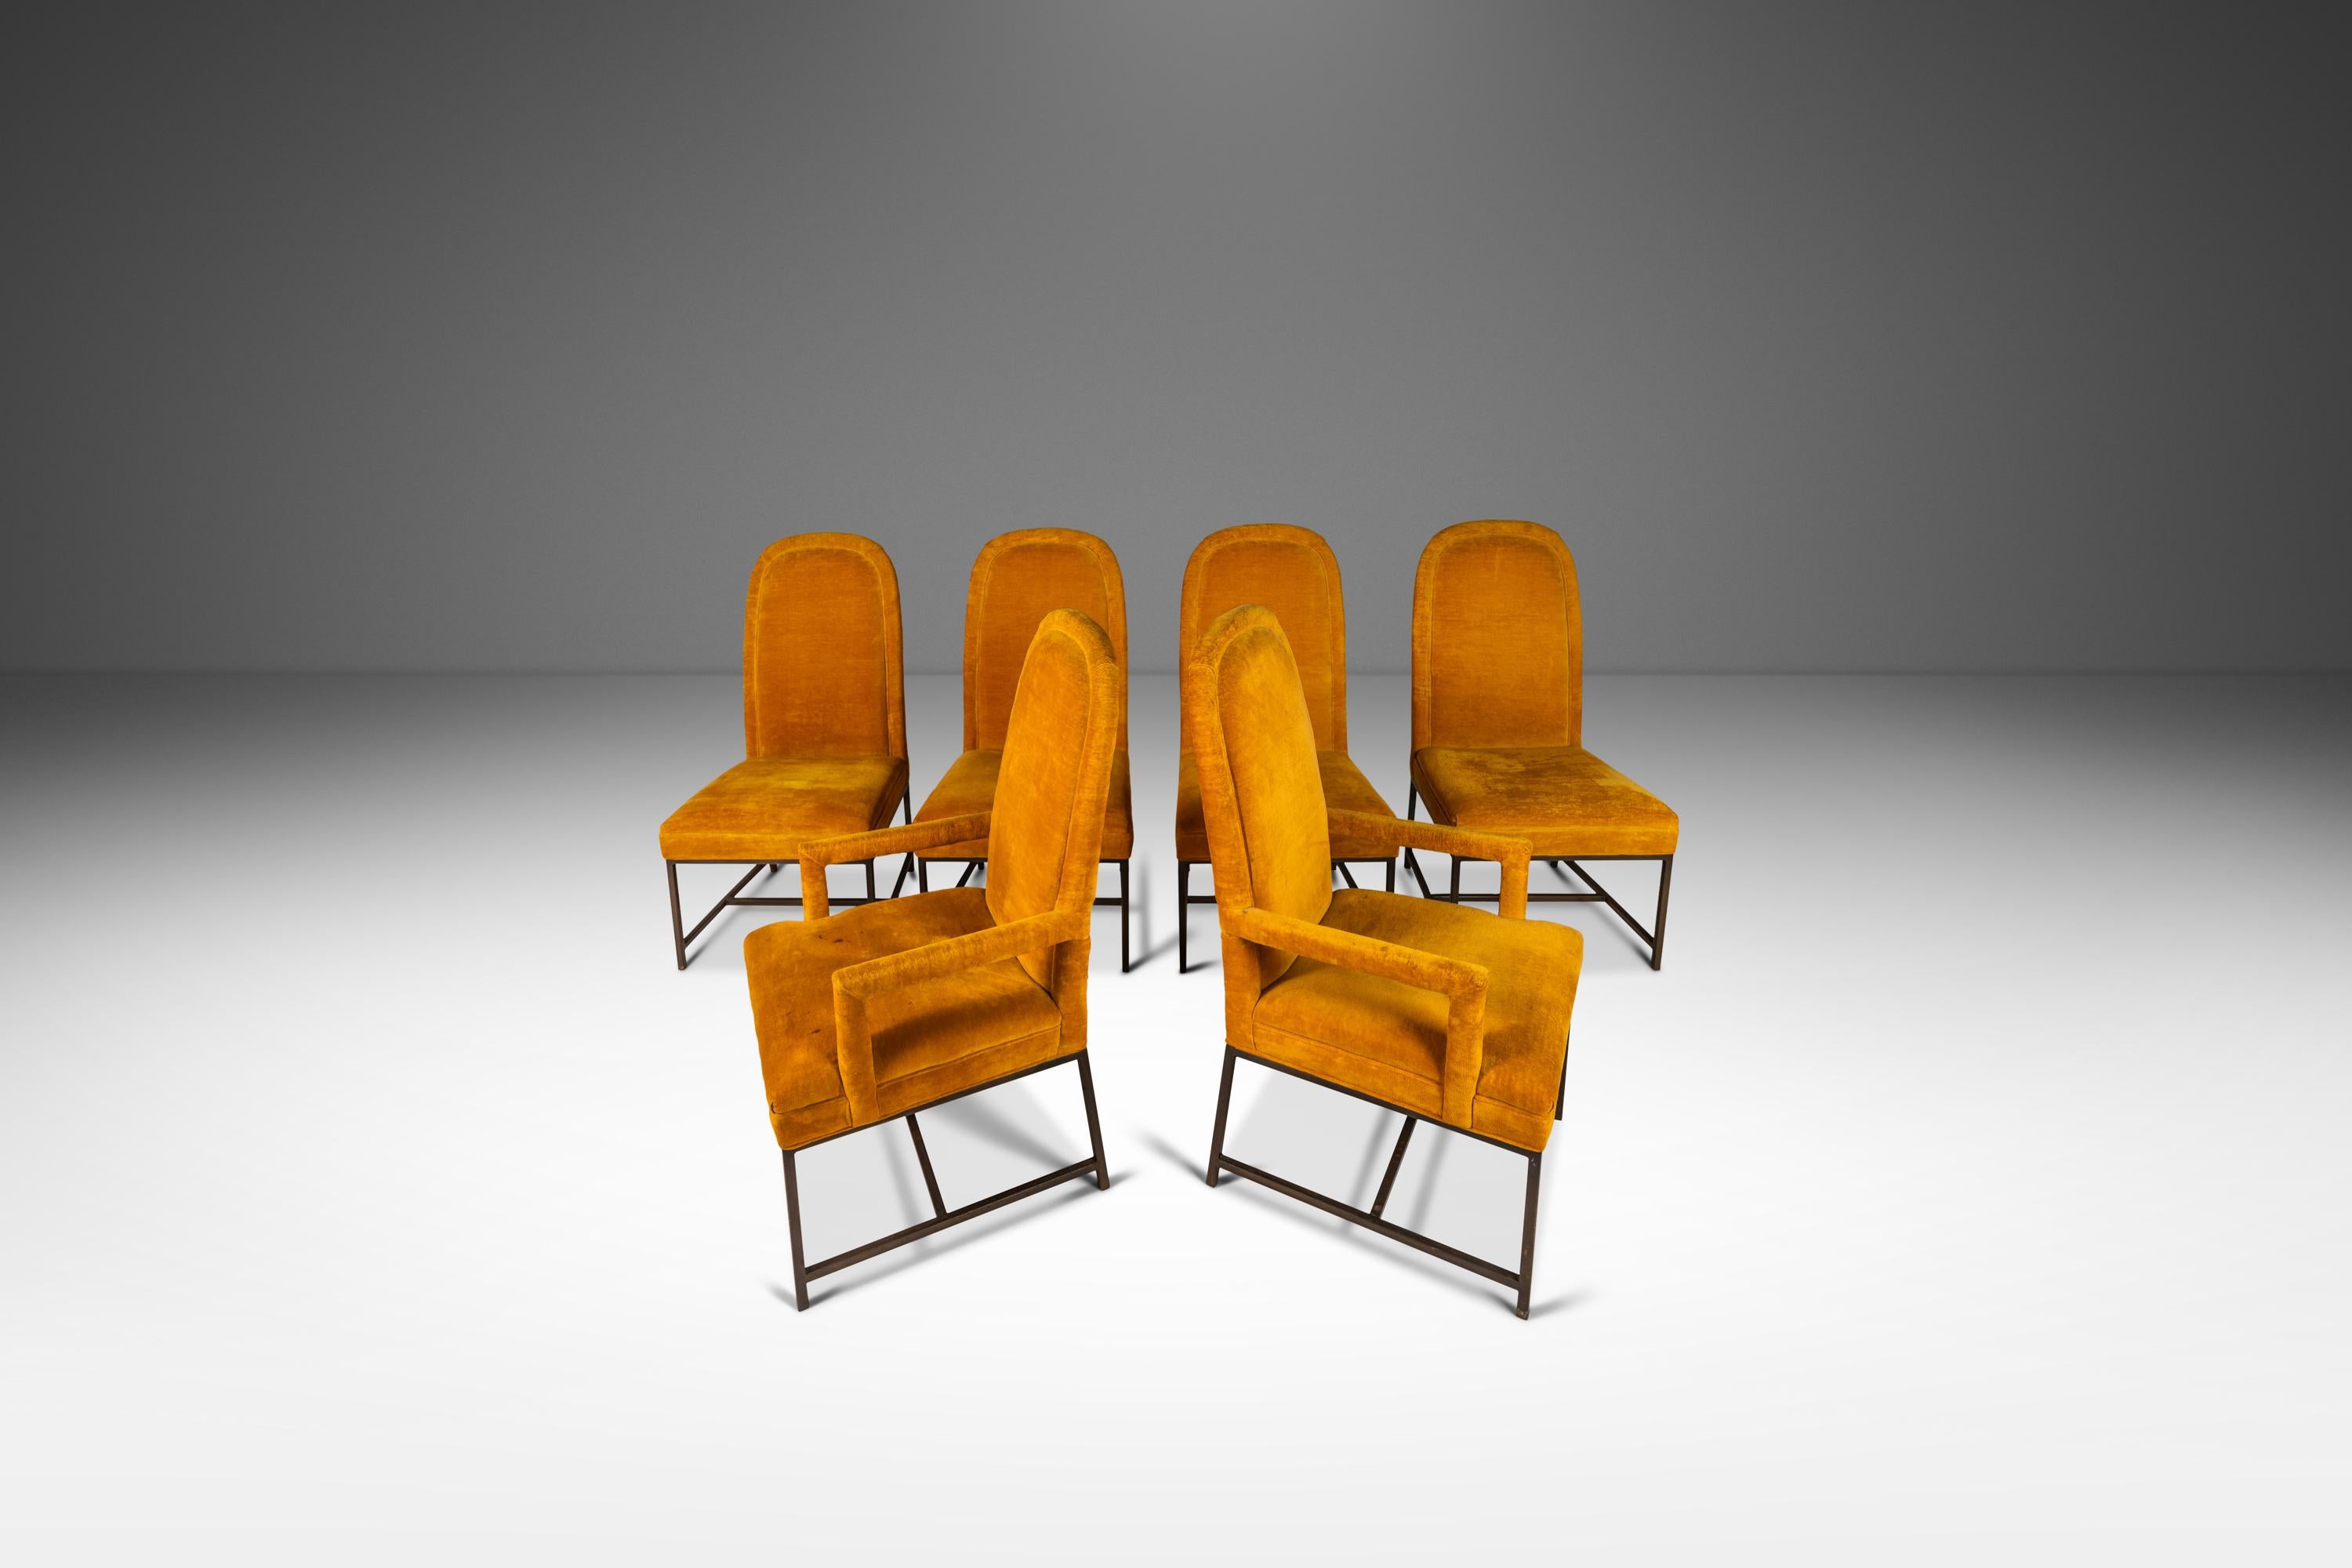 Metal Set of 6 Mid-Century Dining Chairs in the manner of Milo Baughman Style, c. 1960